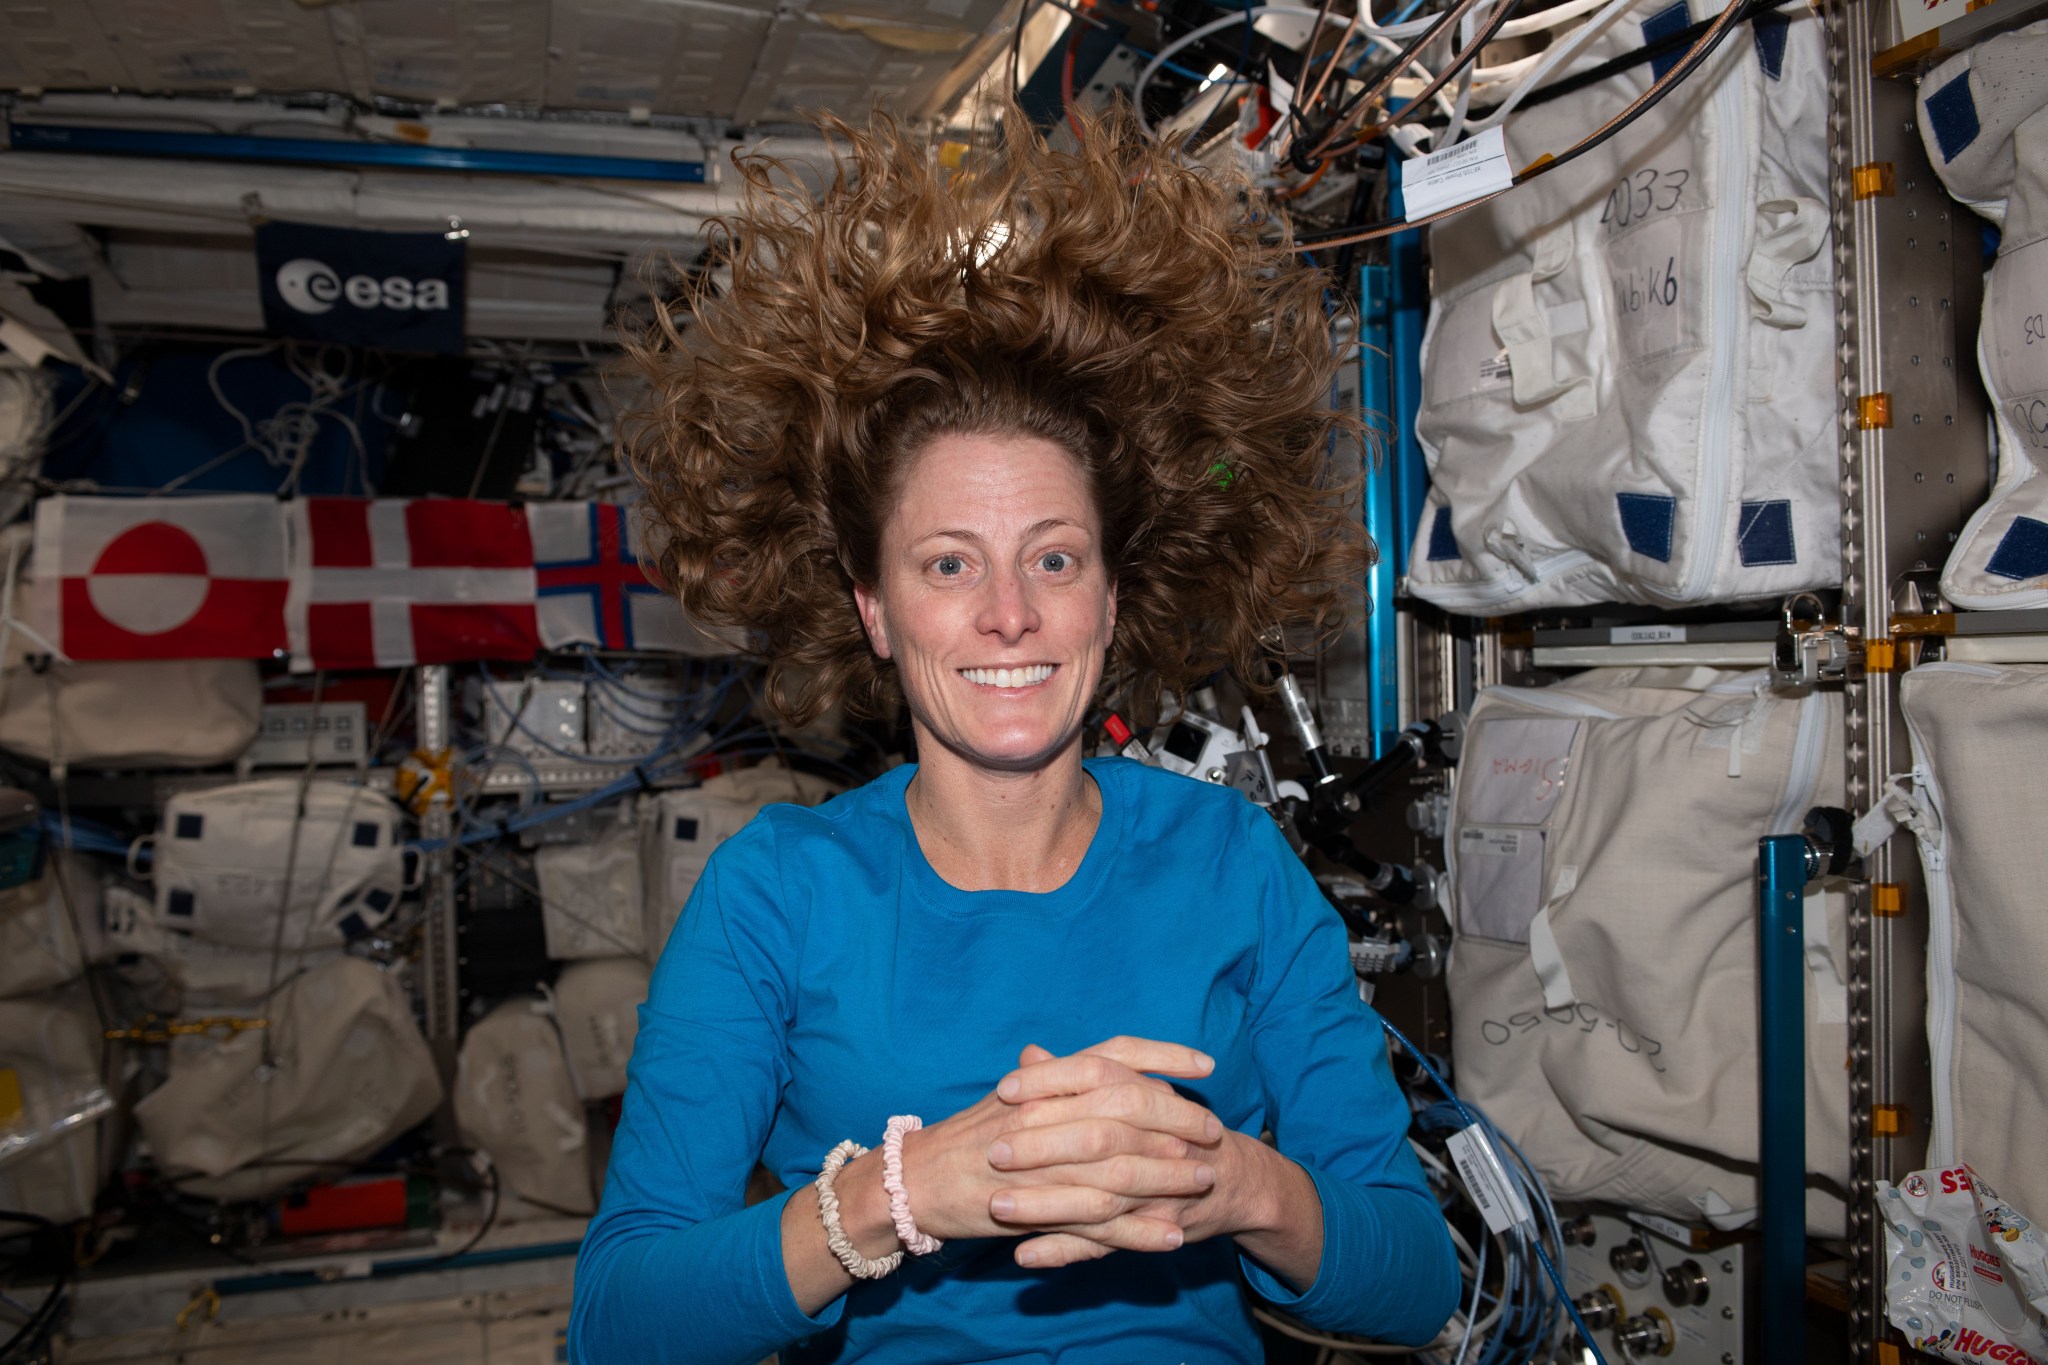 iss070e000668 (Sept. 30, 2023) -- NASA astronaut and Expedition 70 Flight Engineer Loral O'Hara poses for a photo after receiving her first haircut in microgravity.